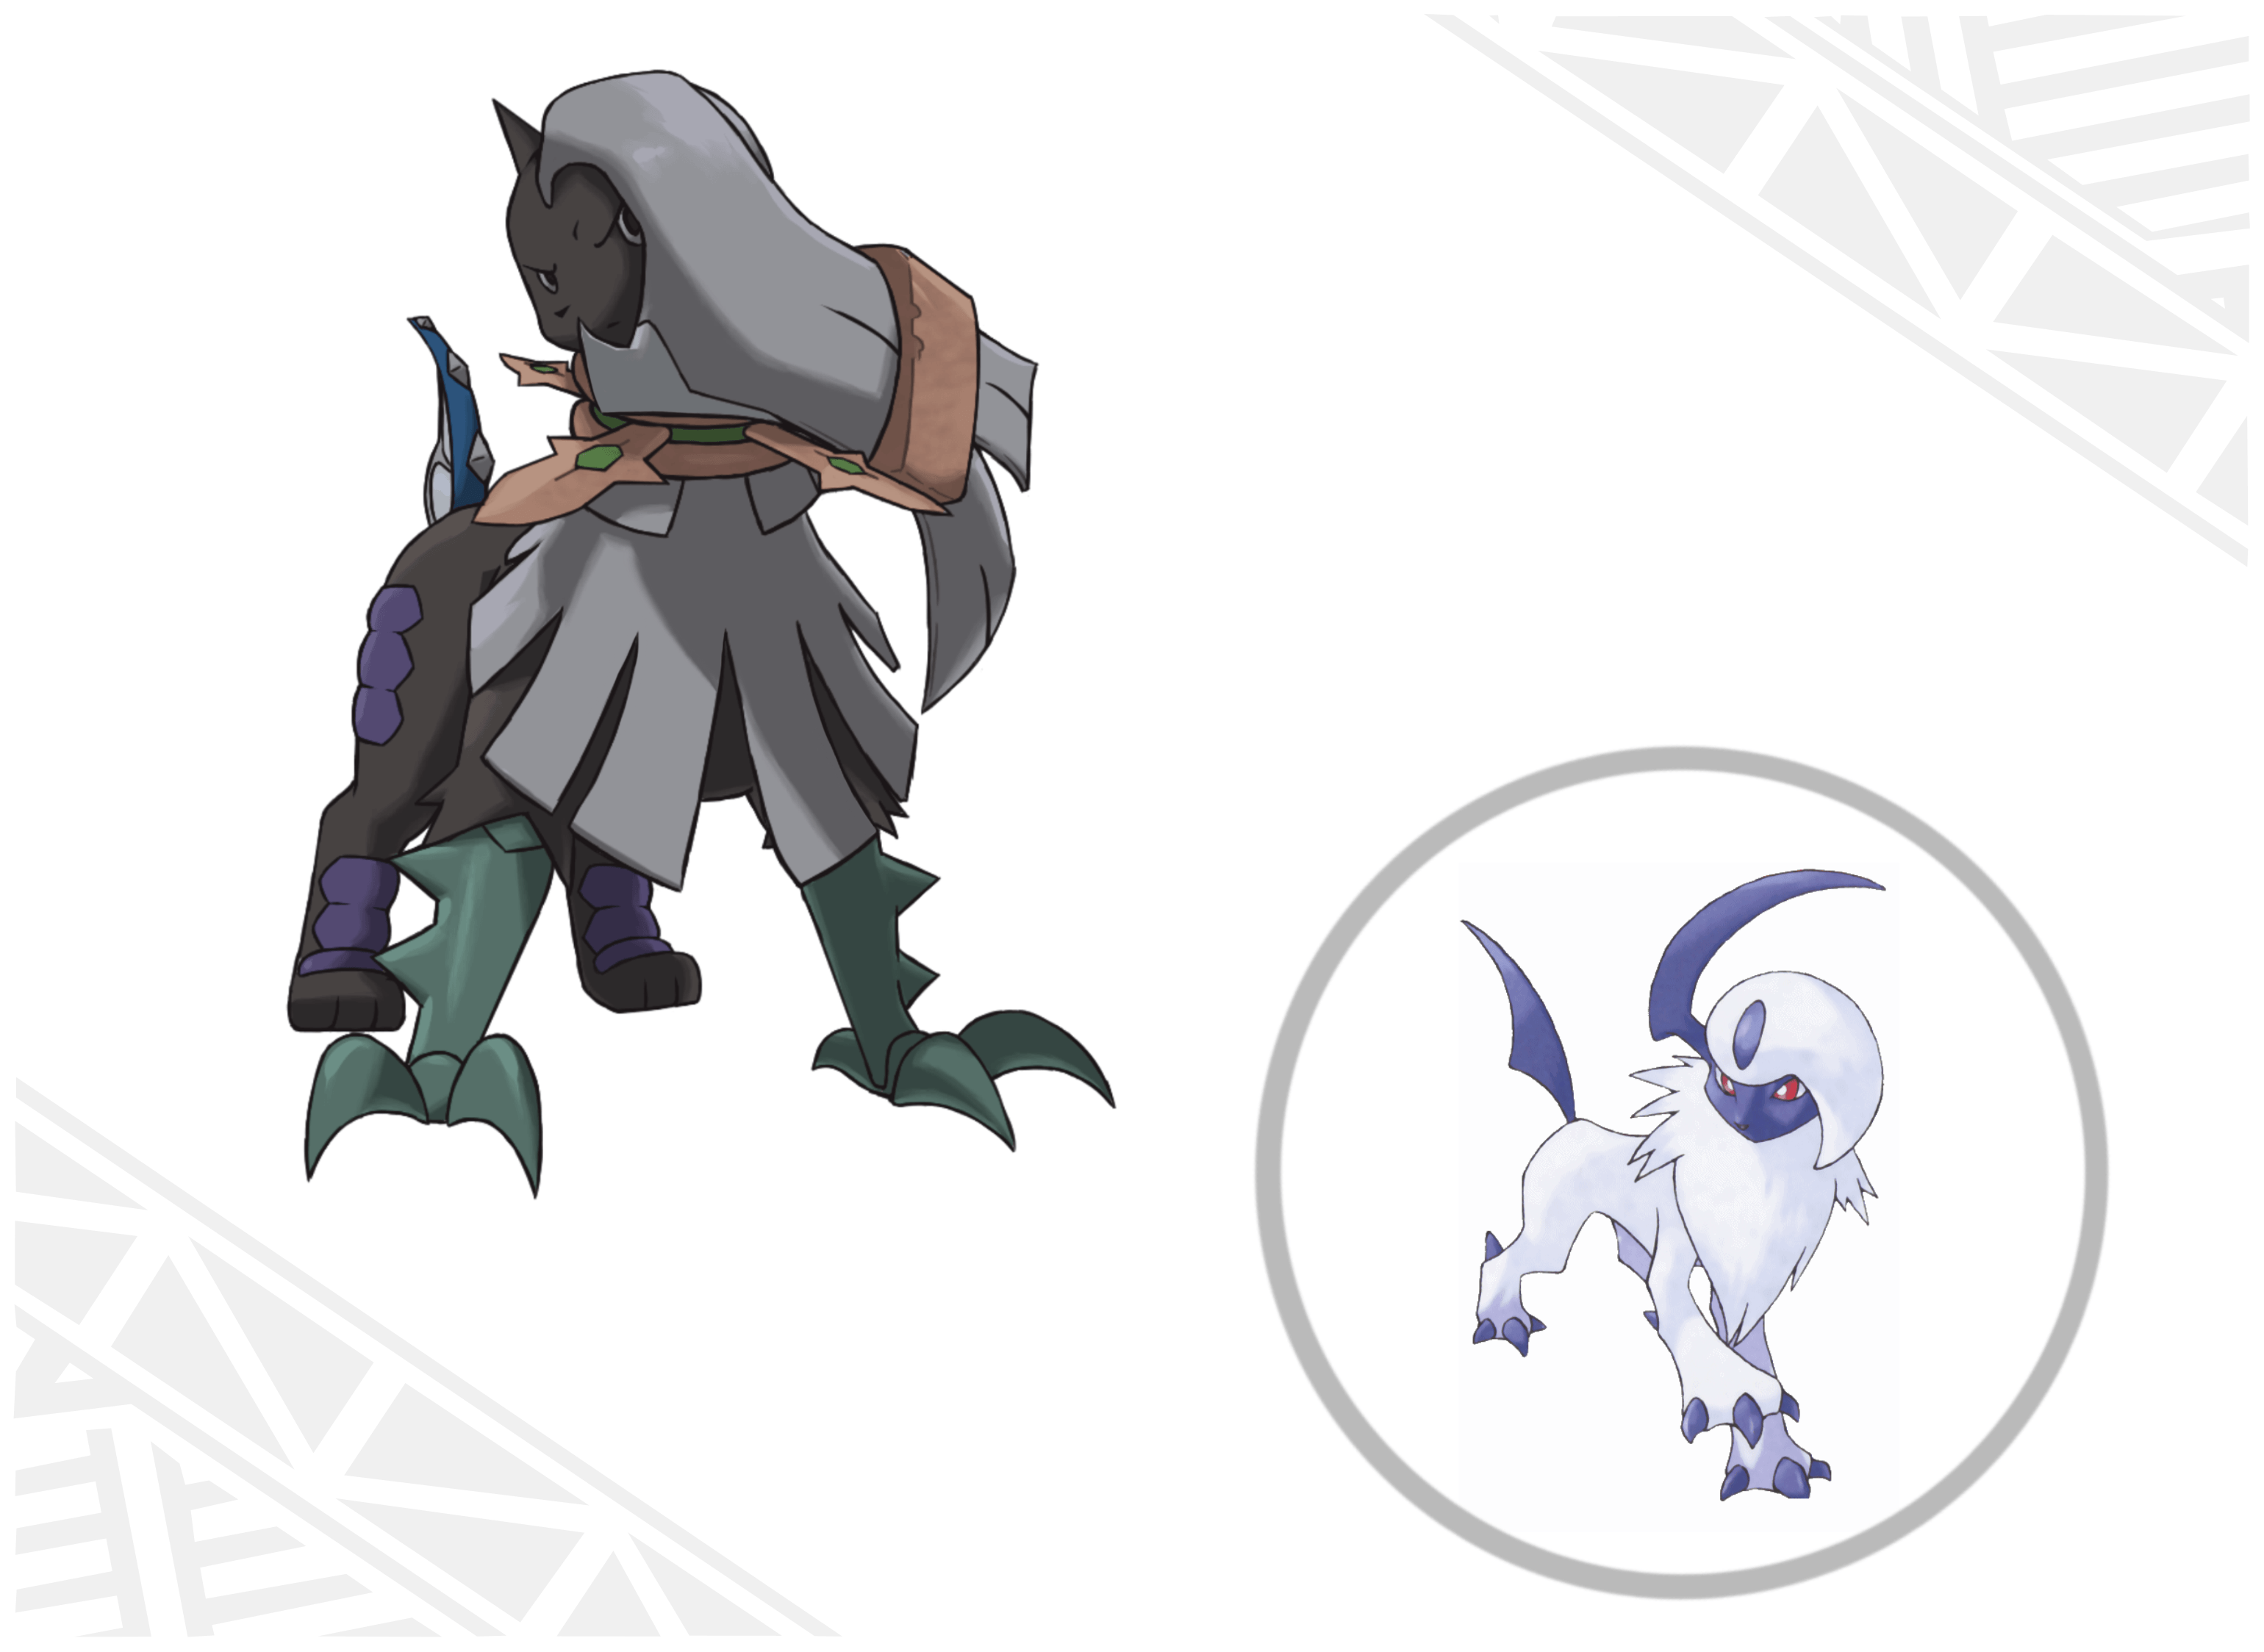 Type: Null an Absol?